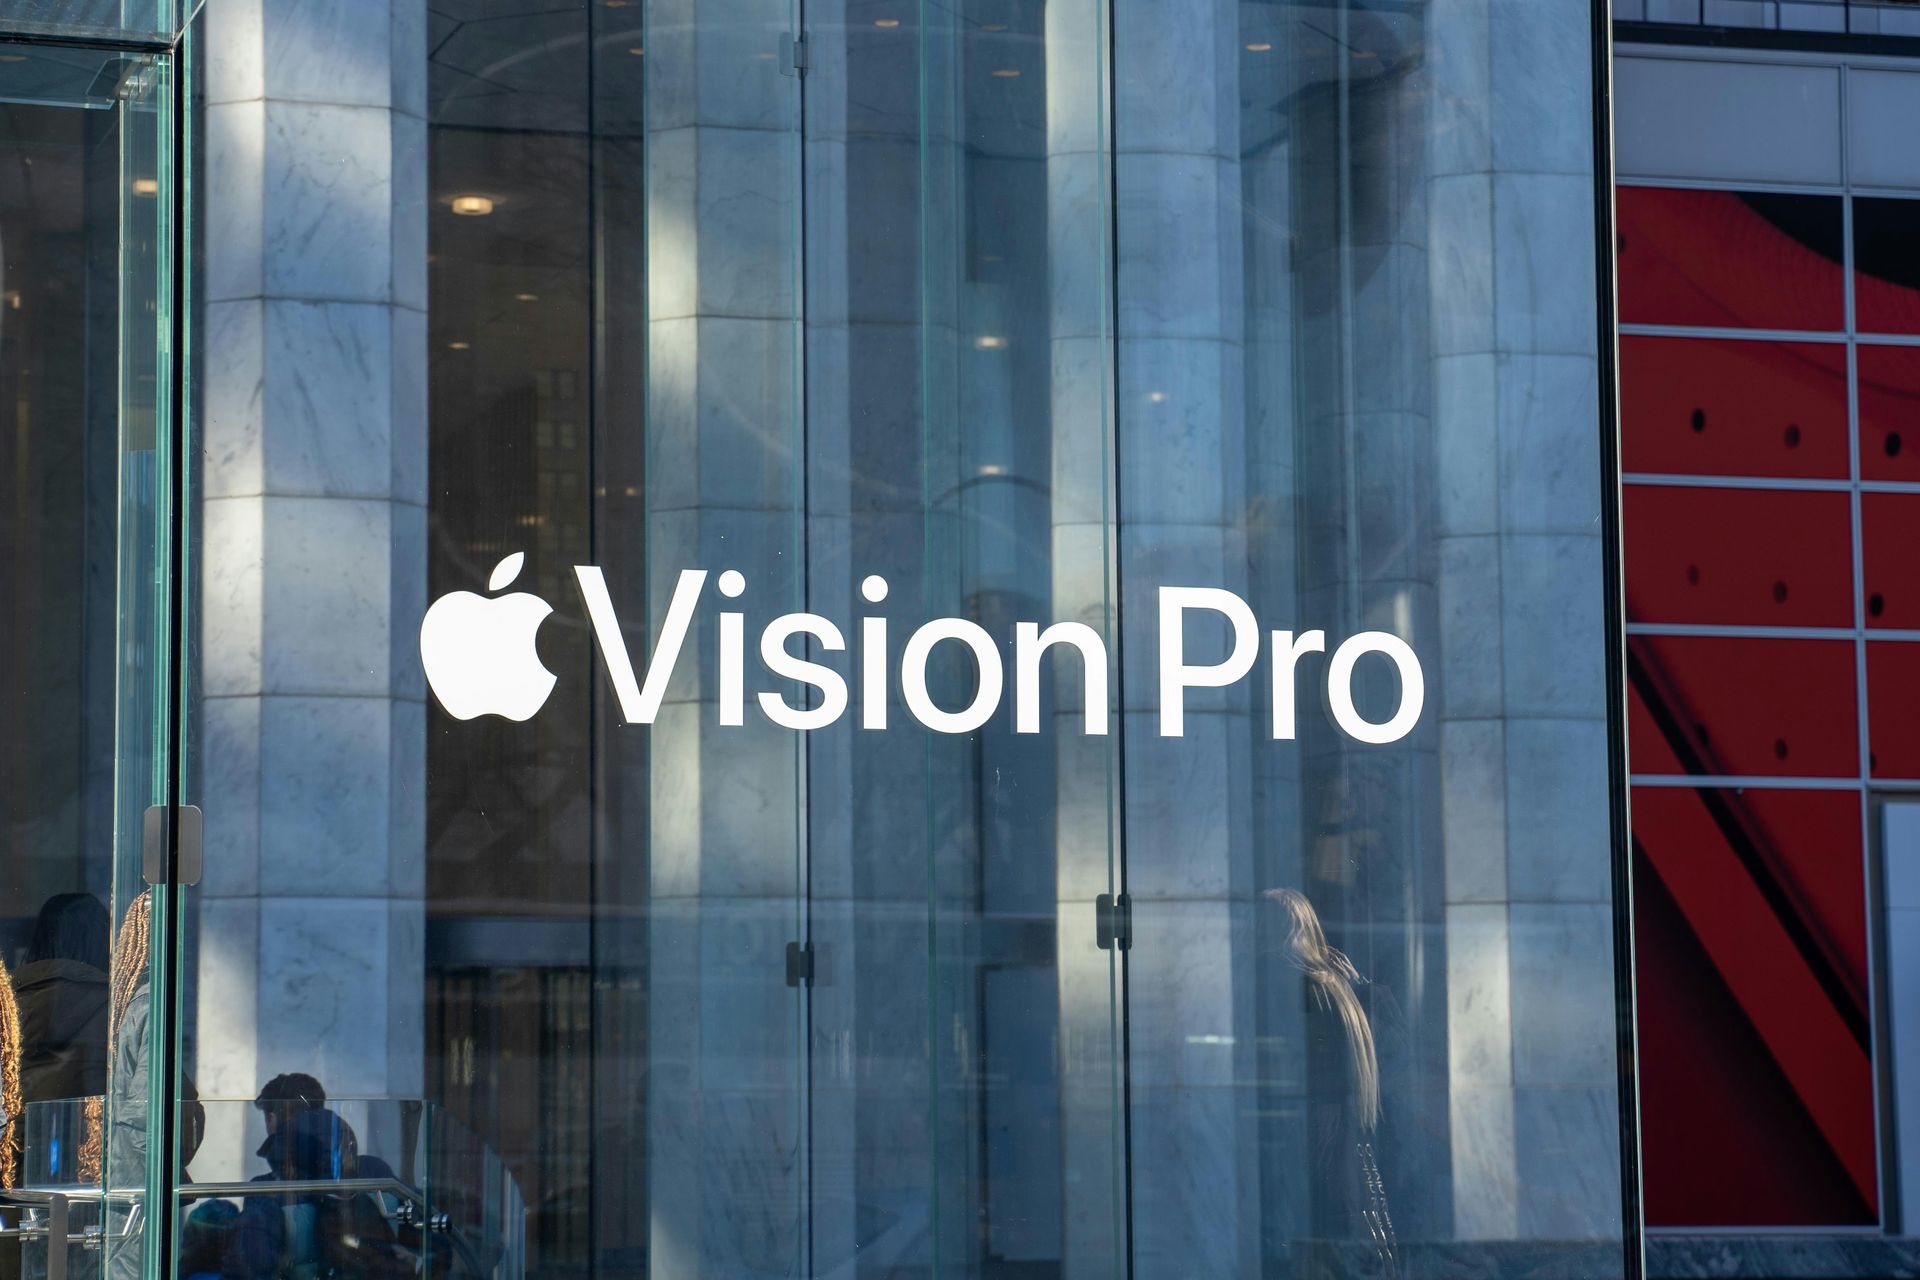 Apple VisionOS and Vision Pro: Features, release date, and more